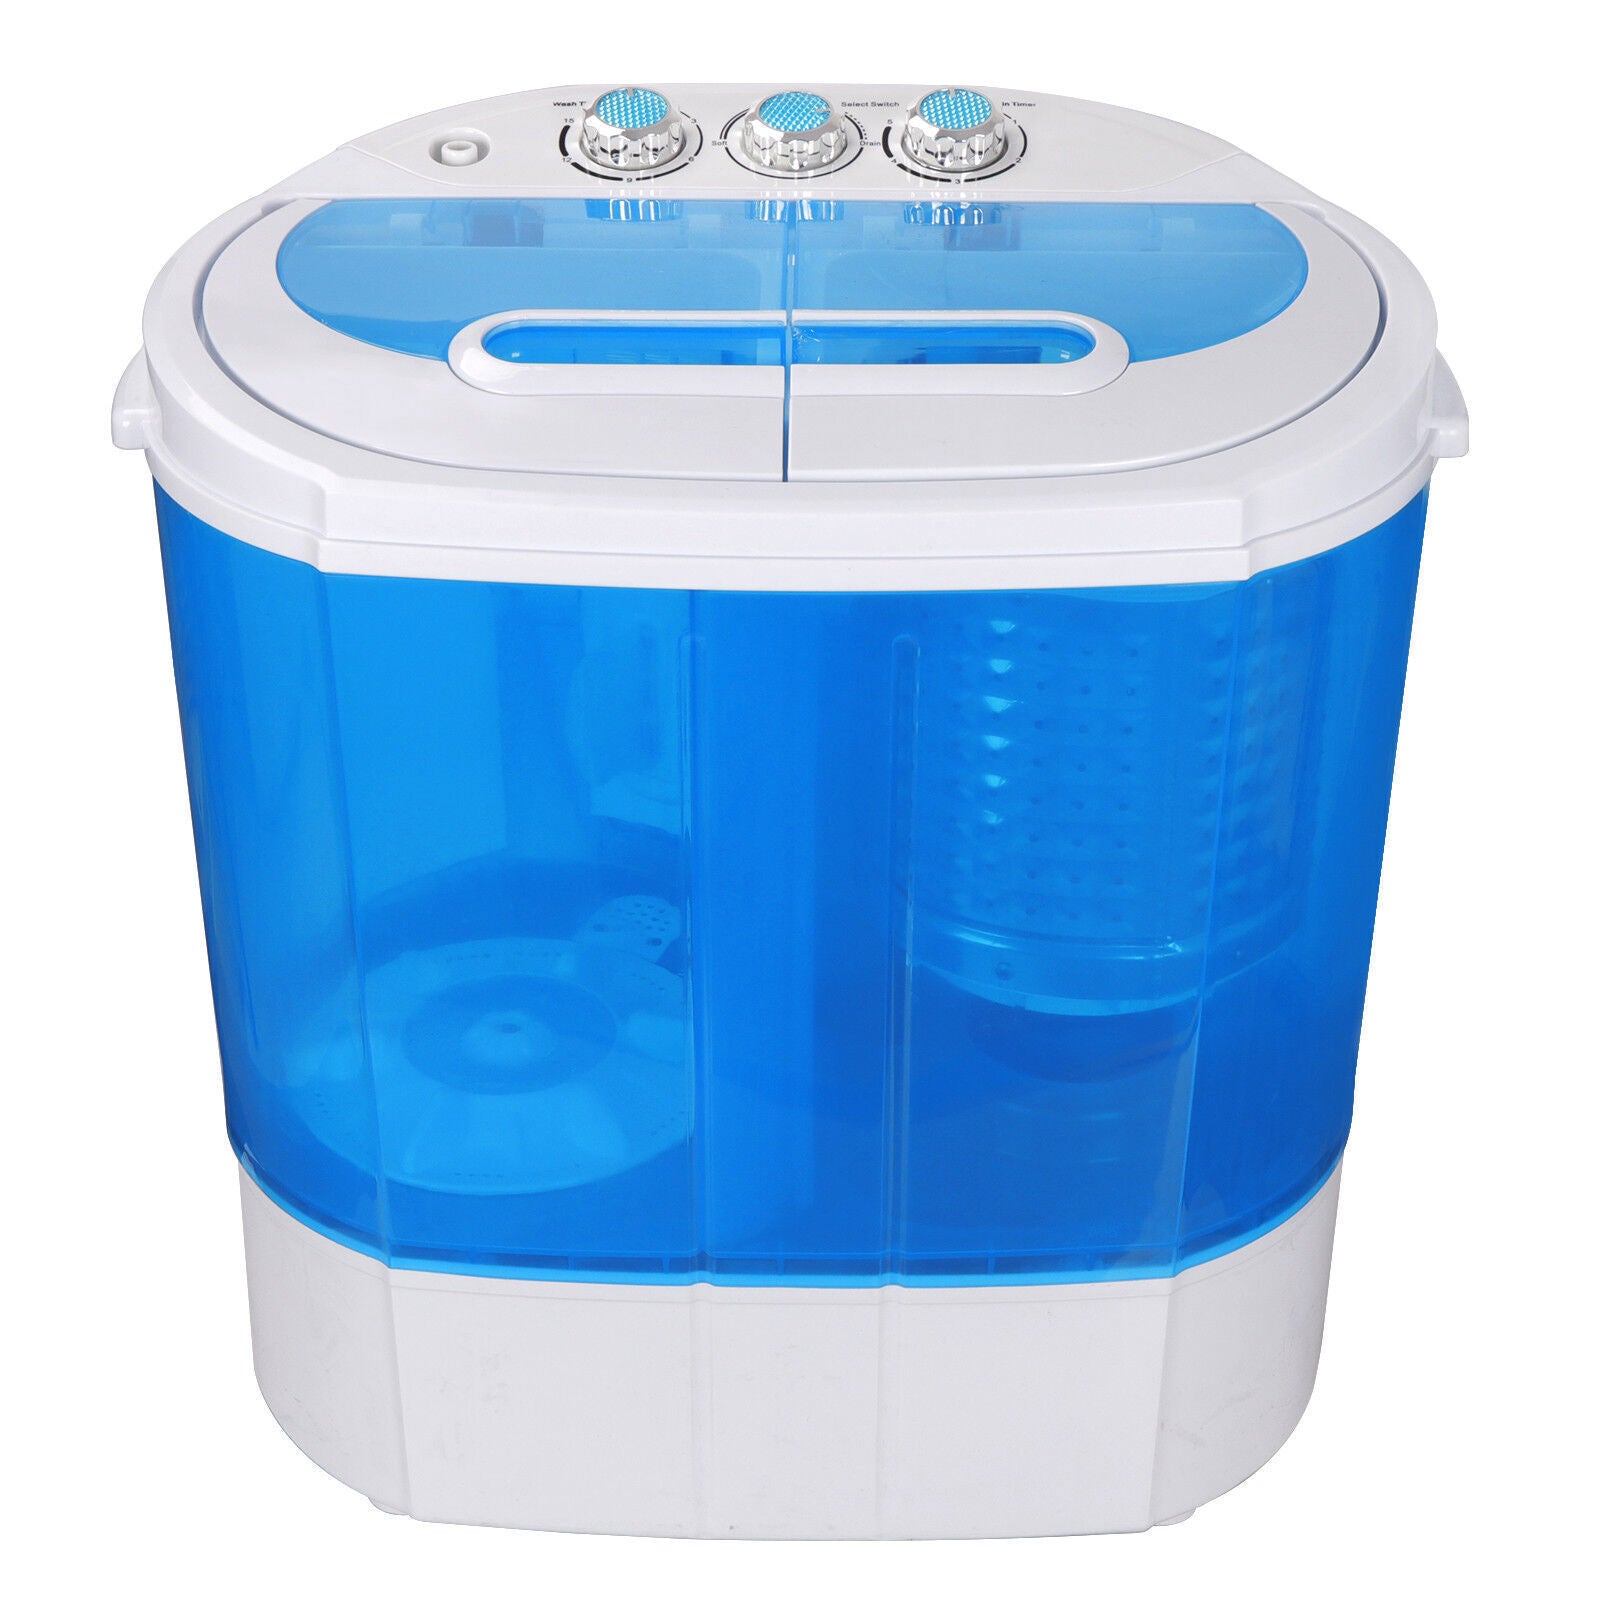 Portable Compact Washing Machine 10lbs Twin Tub Washer Spin Dryer Gravity Drain